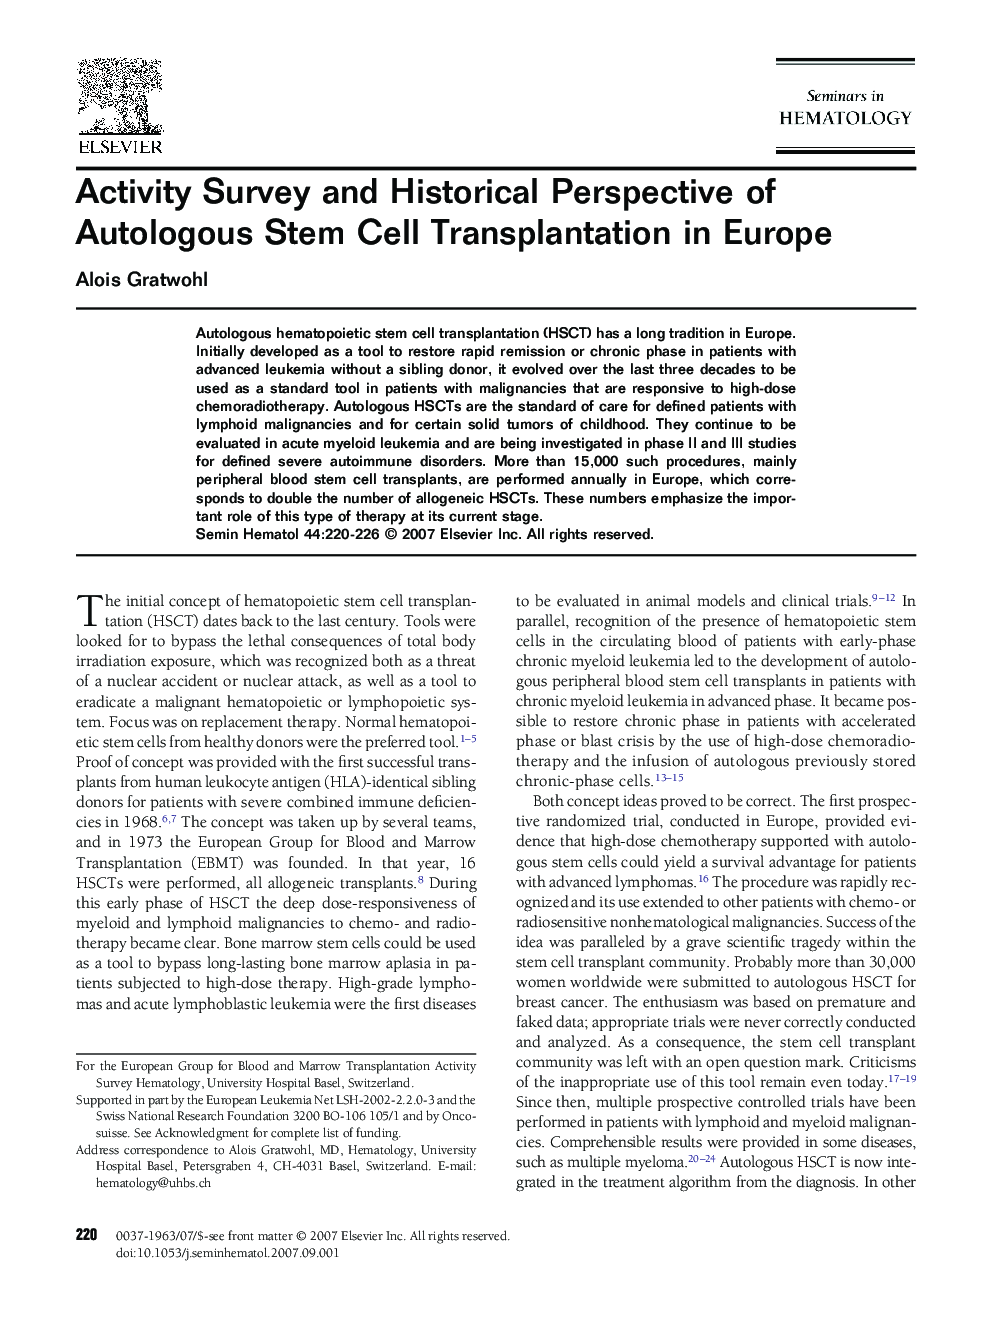 Activity Survey and Historical Perspective of Autologous Stem Cell Transplantation in Europe